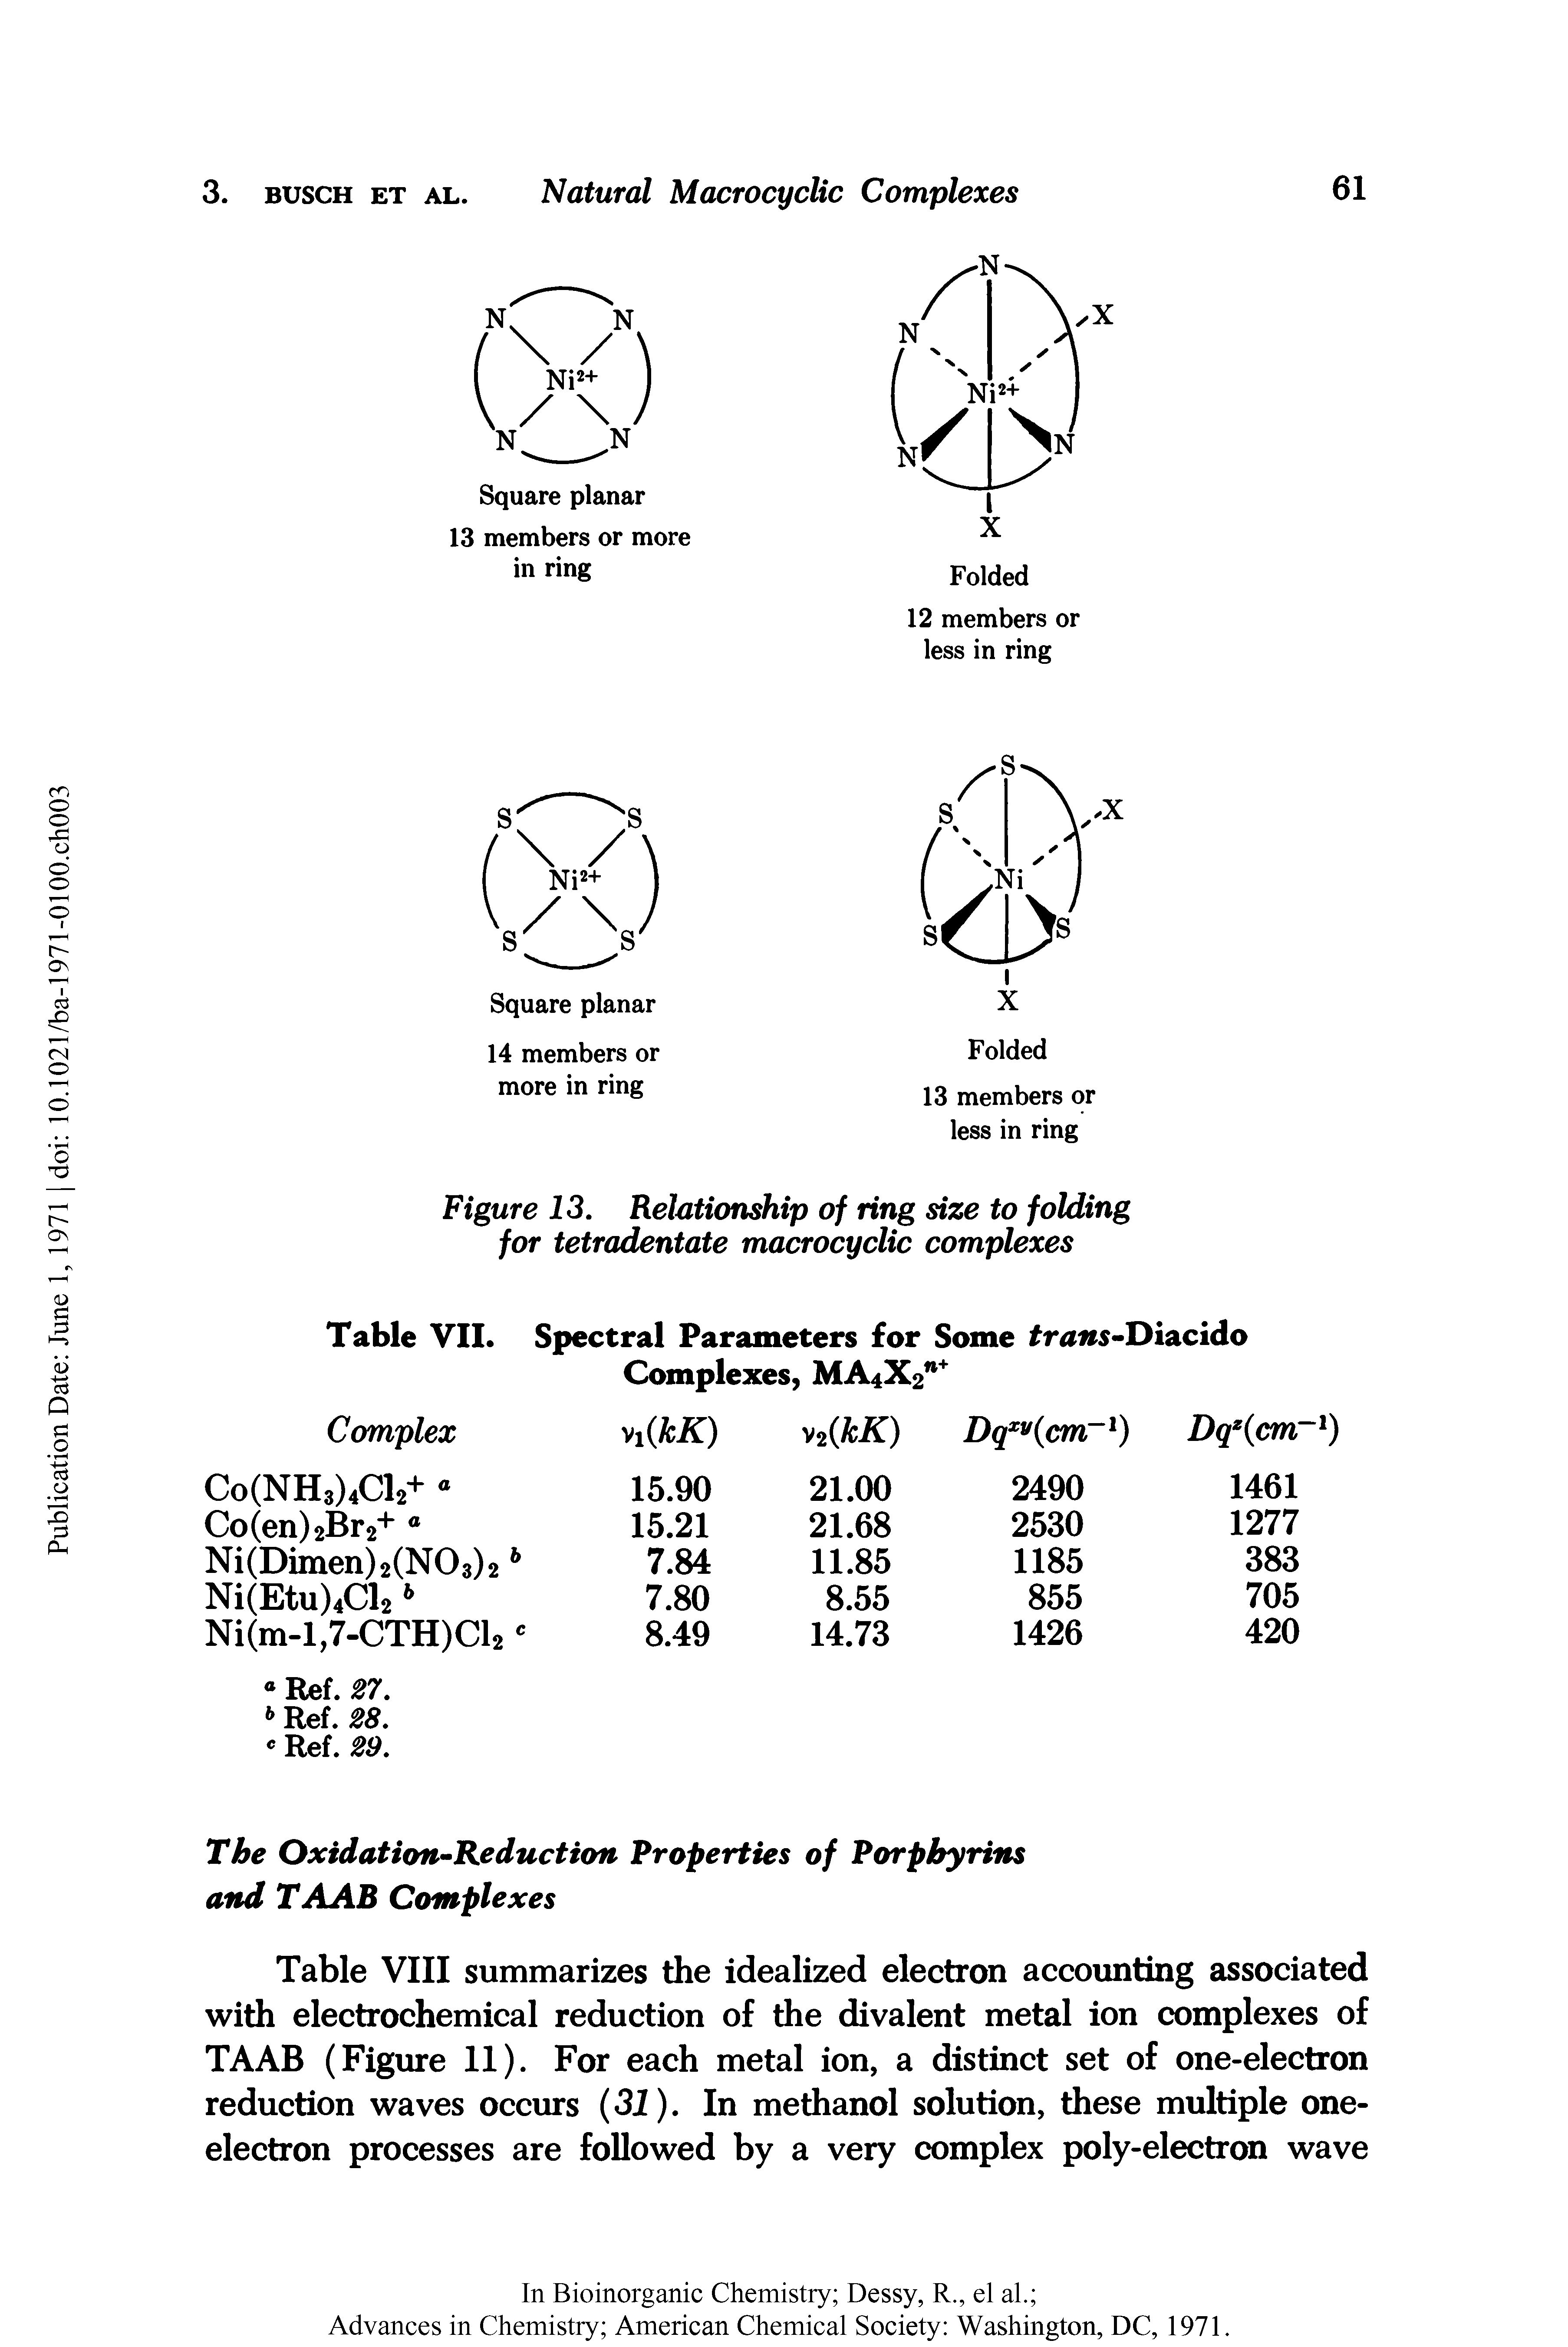 Table VIII summarizes the idealized electron accounting associated with electrochemical reduction of the divalent metal ion complexes of TAAB (Figure 11). For each metal ion, a distinct set of one-electron reduction waves occurs (31). In methanol solution, these multiple one-electron processes are followed by a very complex poly-electron wave...